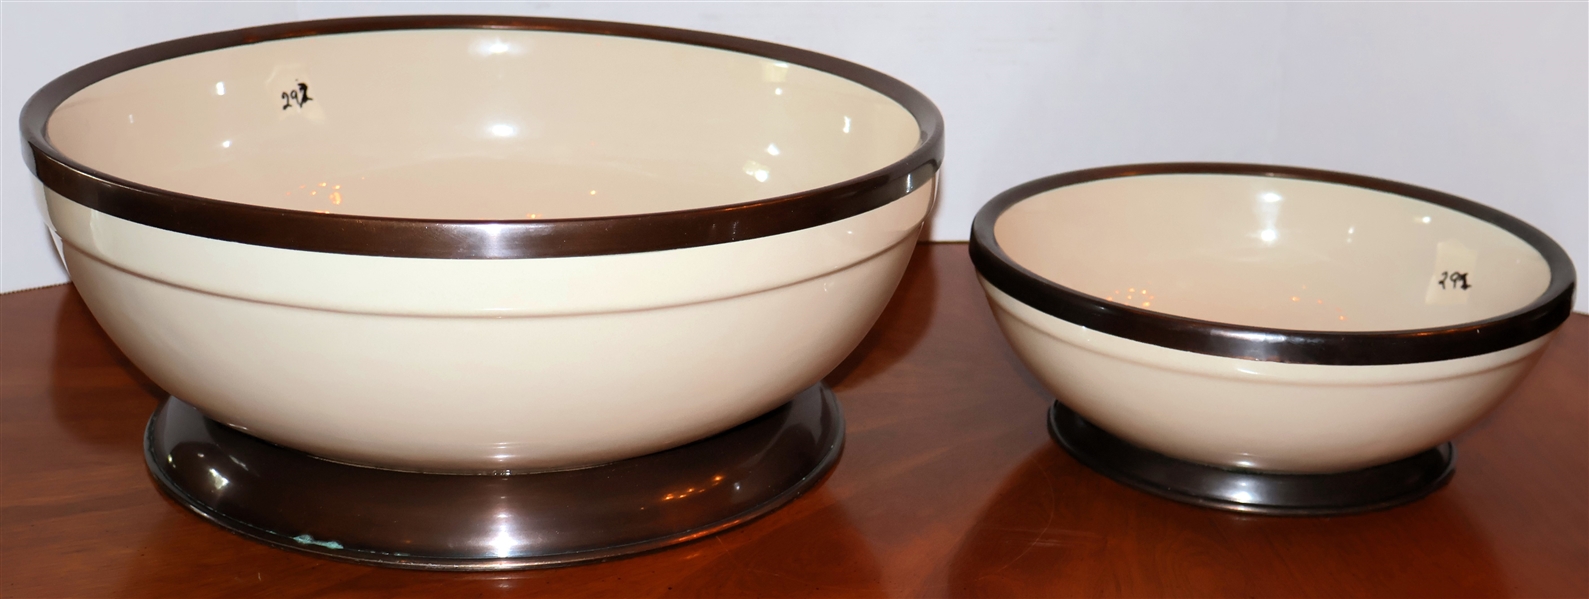 2 Large Stoneware Bowls with Bronze Colored Metal Trim and Base - Largest Bowl Measures 15" Across